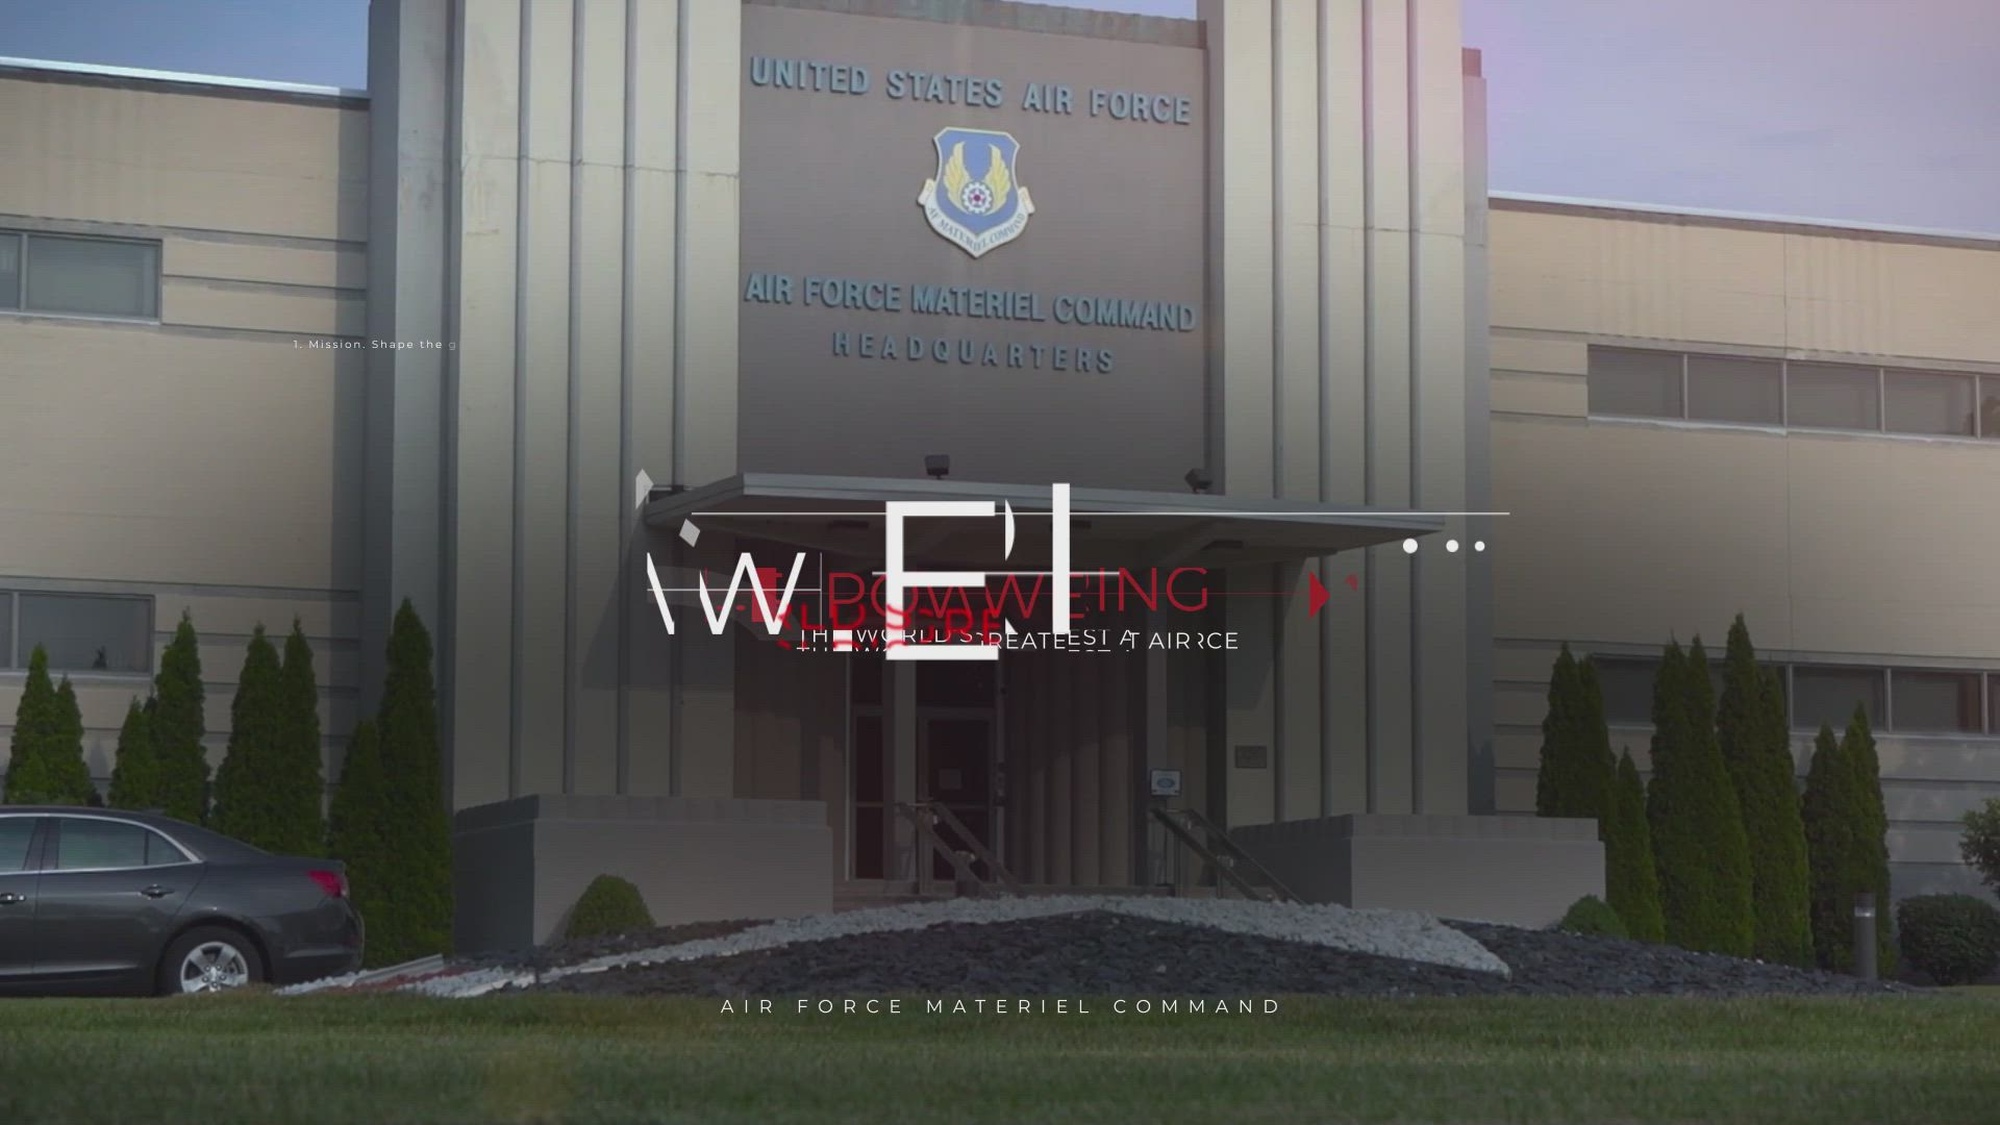 The Air Force Materiel Command powers the world’s greatest Air Force by developing, delivering, supporting, and sustaining war-winning capabilities headquartered at Wright-Patterson Air Force Base, Ohio, Jan. 6, 2020. AFMC is comprised of six centers located across eight bases. (U.S. Air Force video by Christopher Decker)